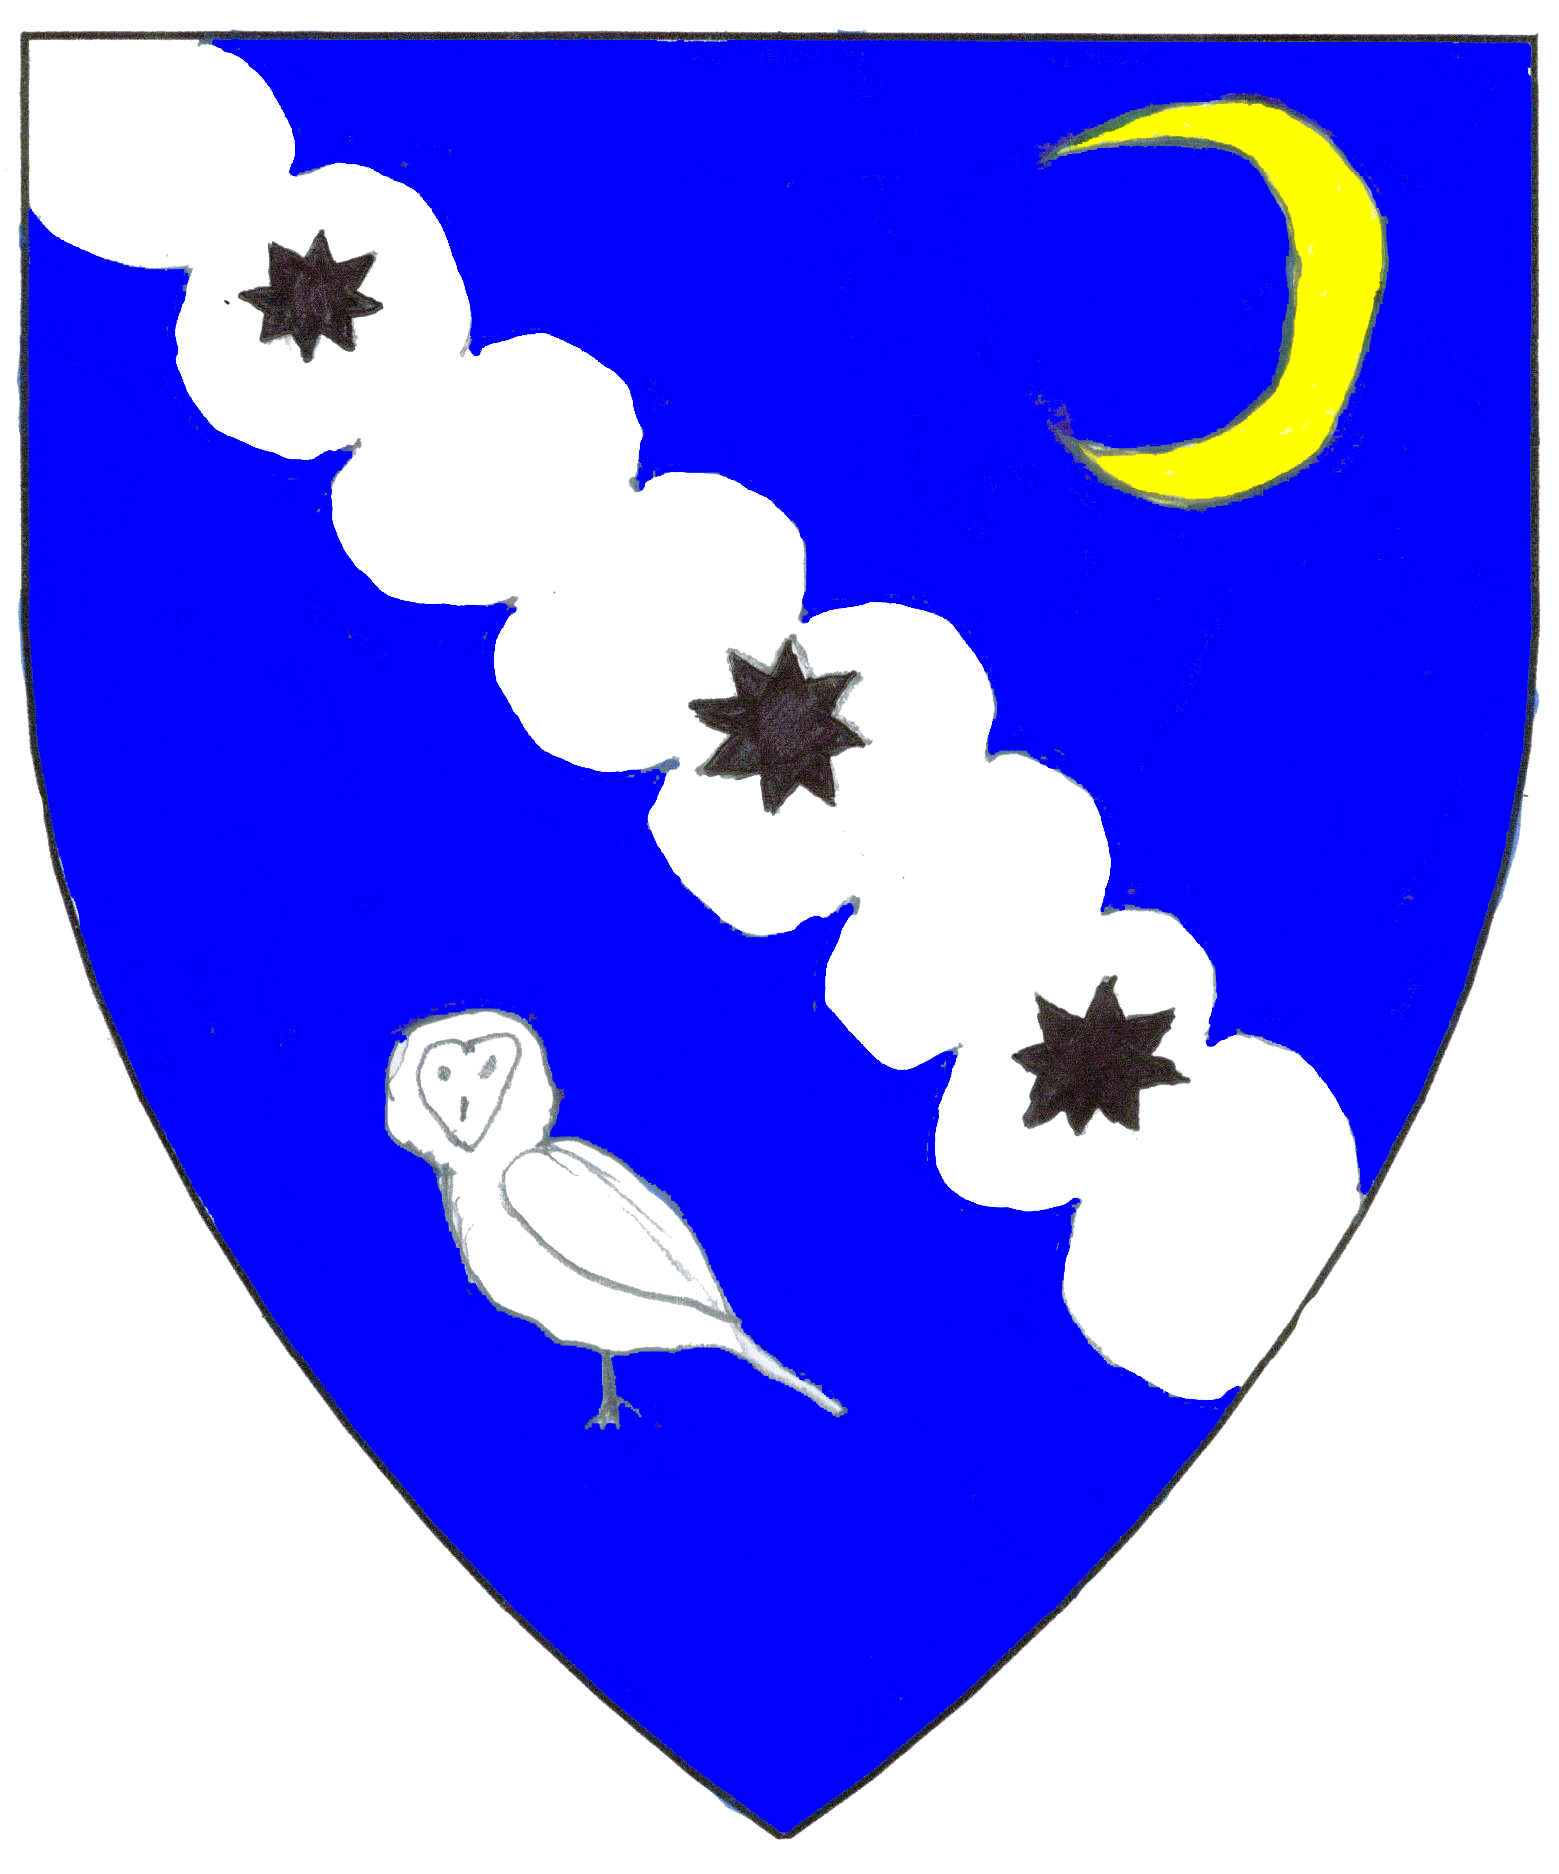 The arms of Tabitha the Quiet